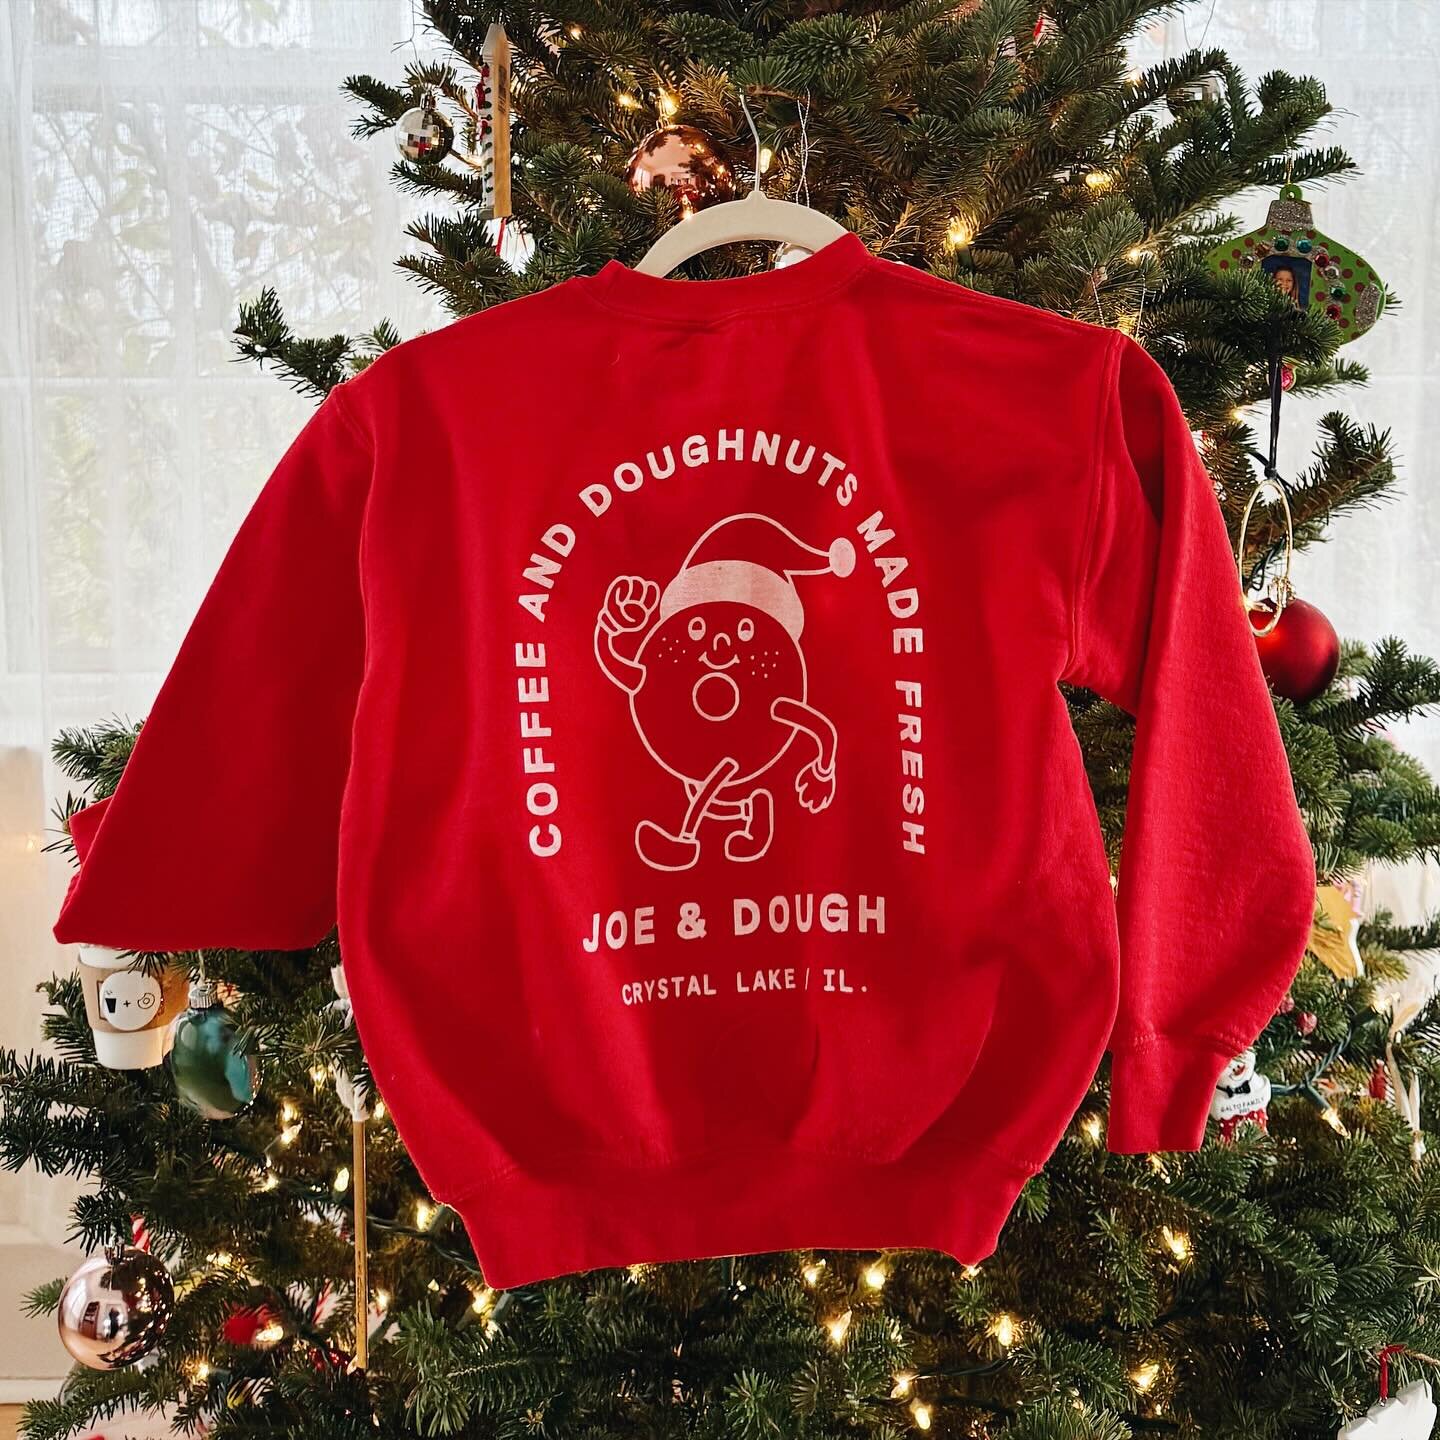 Now available: tees and crewnecks in our limited edition holiday print!! HOW CUTE ARE THEY?! 🤩 These are being made to order by none other than our girl @ninetytwo.creative. 

A few ways to place an order: through DM, in person at one of our public 